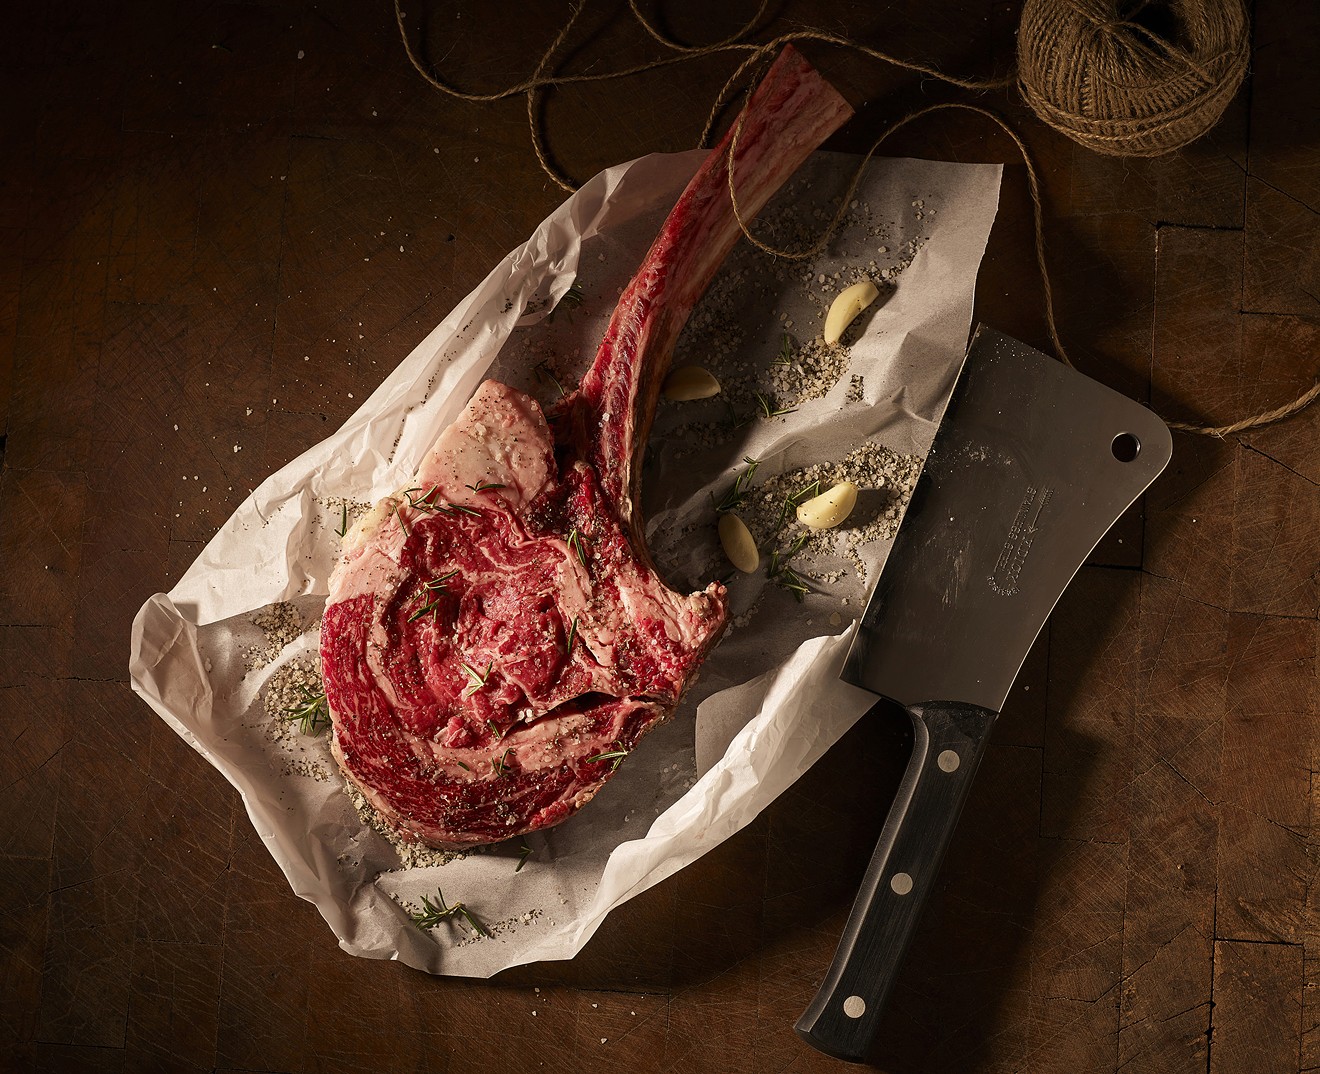 From Japanese wagyu to dry-aged prime beef, B&B Butchers is offering the ultimate meat tasting experience.